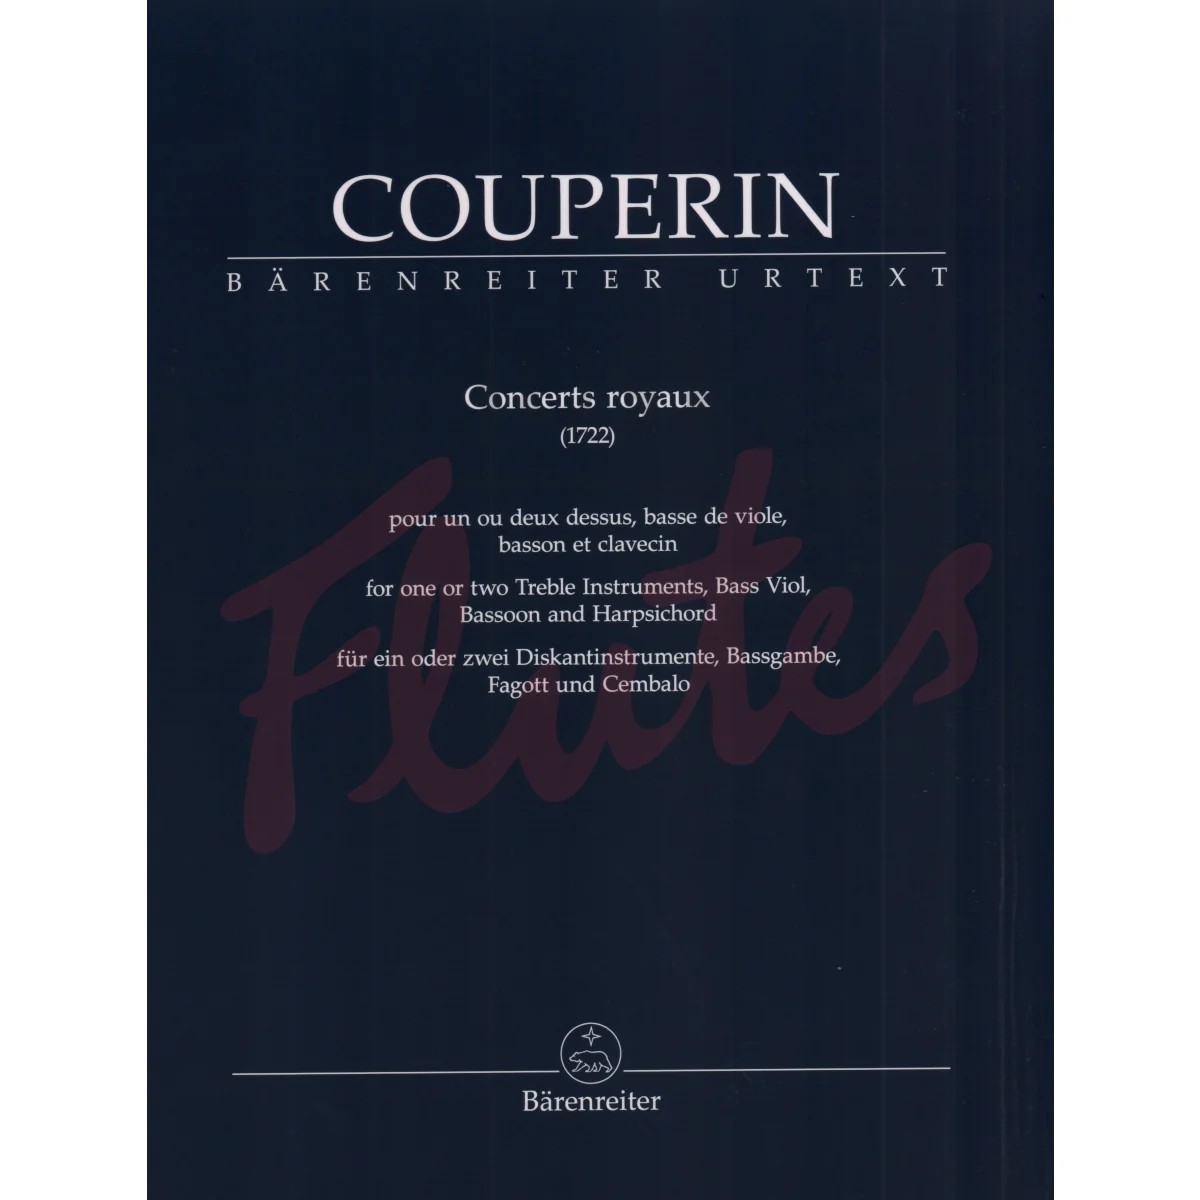 Concerts Royaux for One or Two Treble Instruments, Bass Viol, Bassoon and Harpsichord